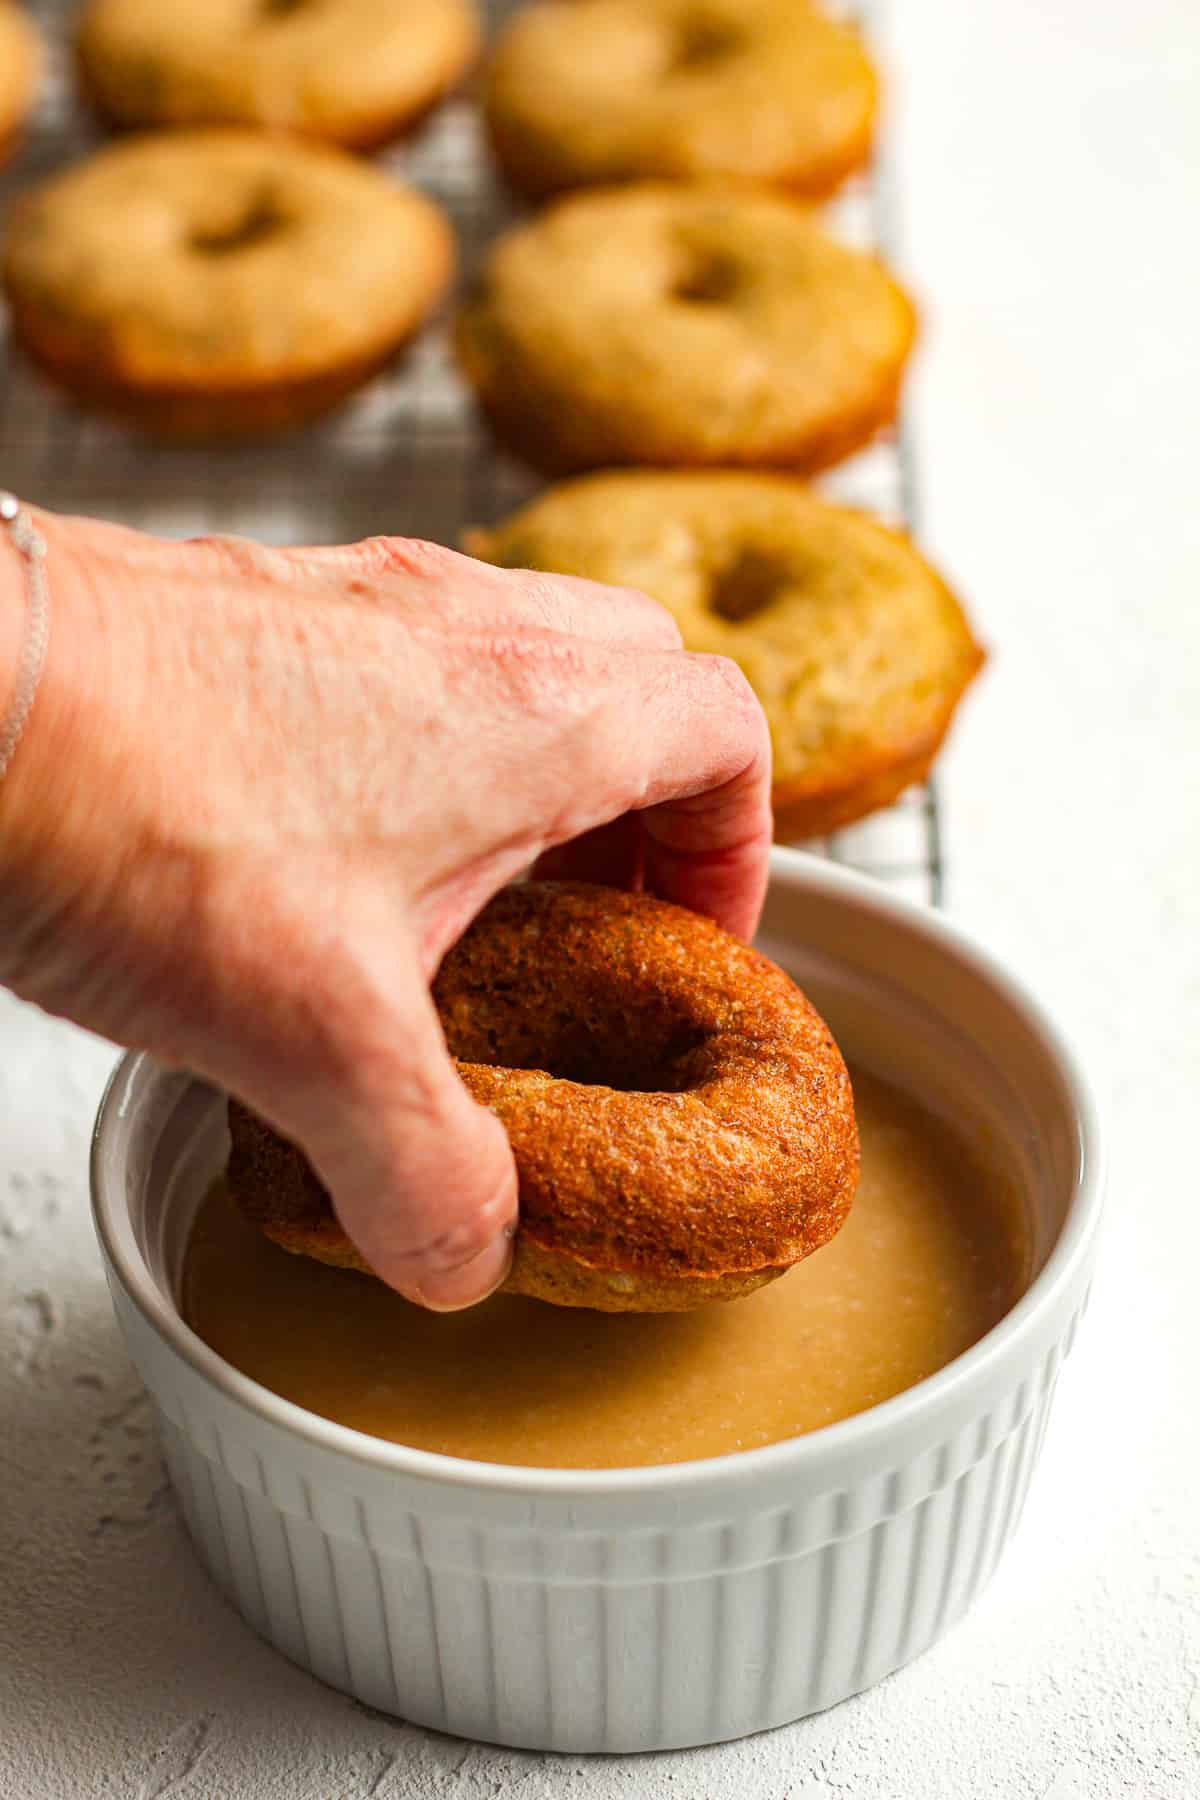 A hand dipping a donut in some brown sugar glaze.